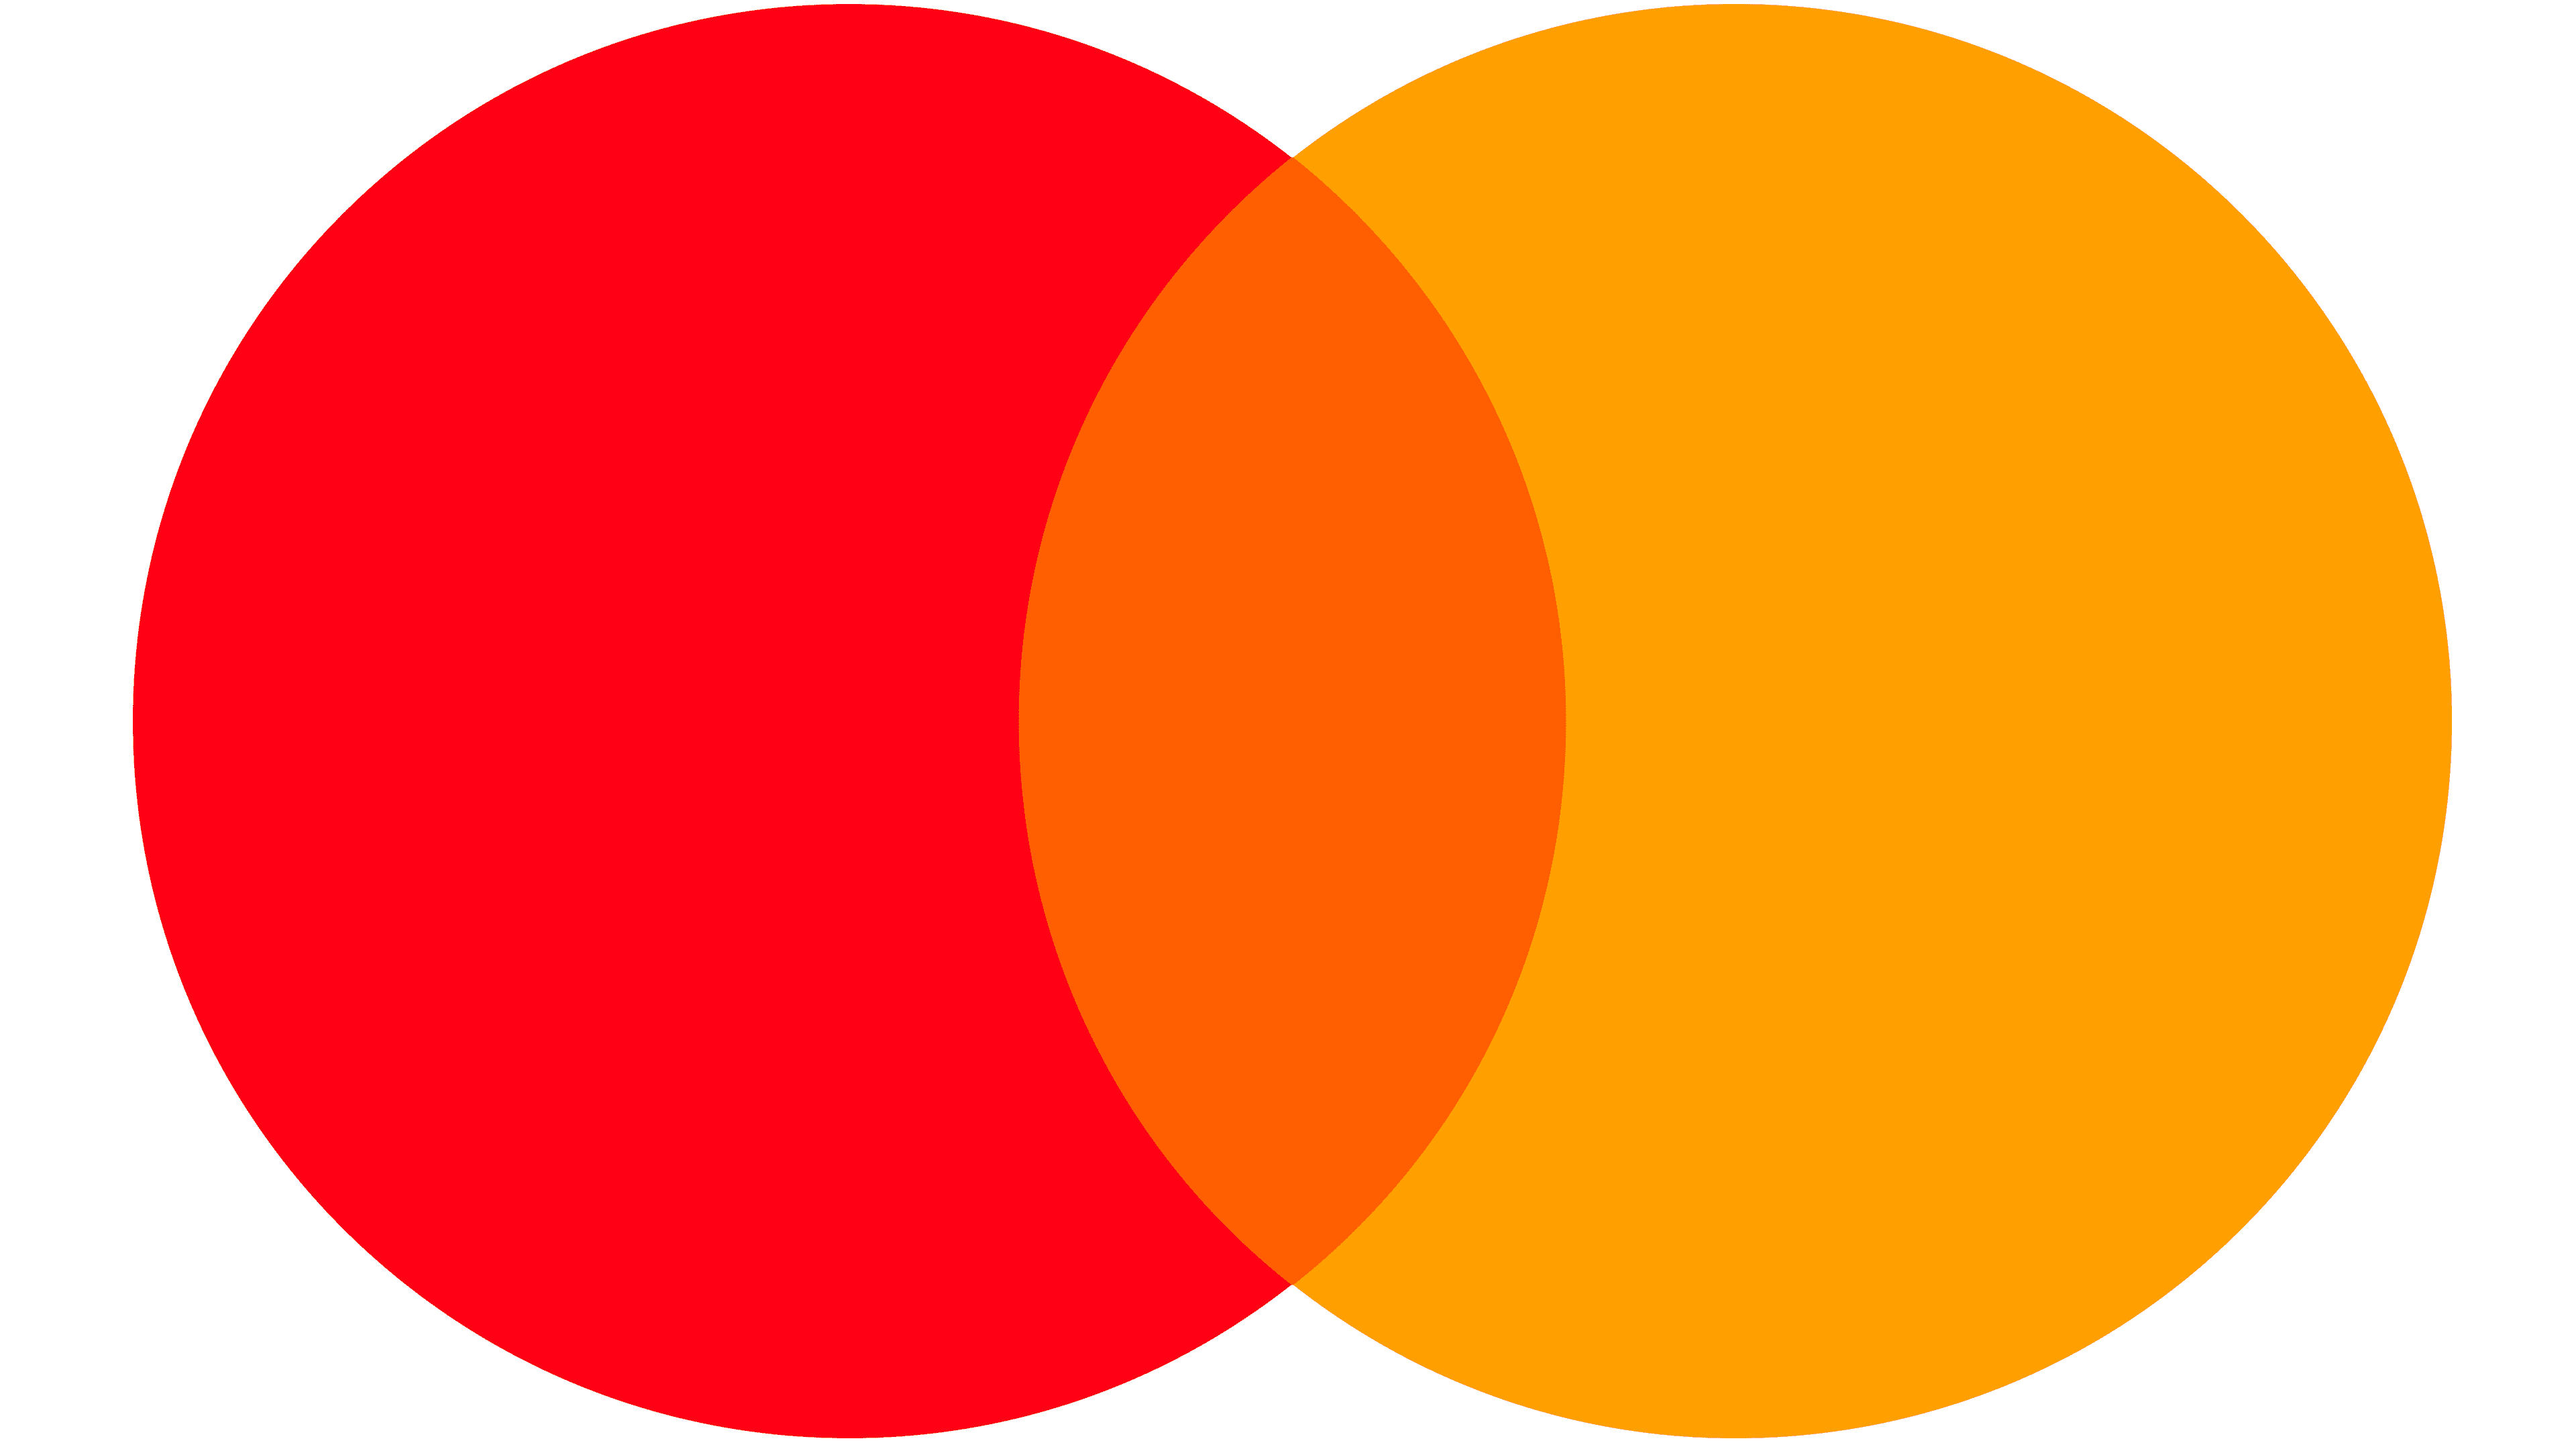 Red and organge balls intersecting MasterCard logo with link to their website